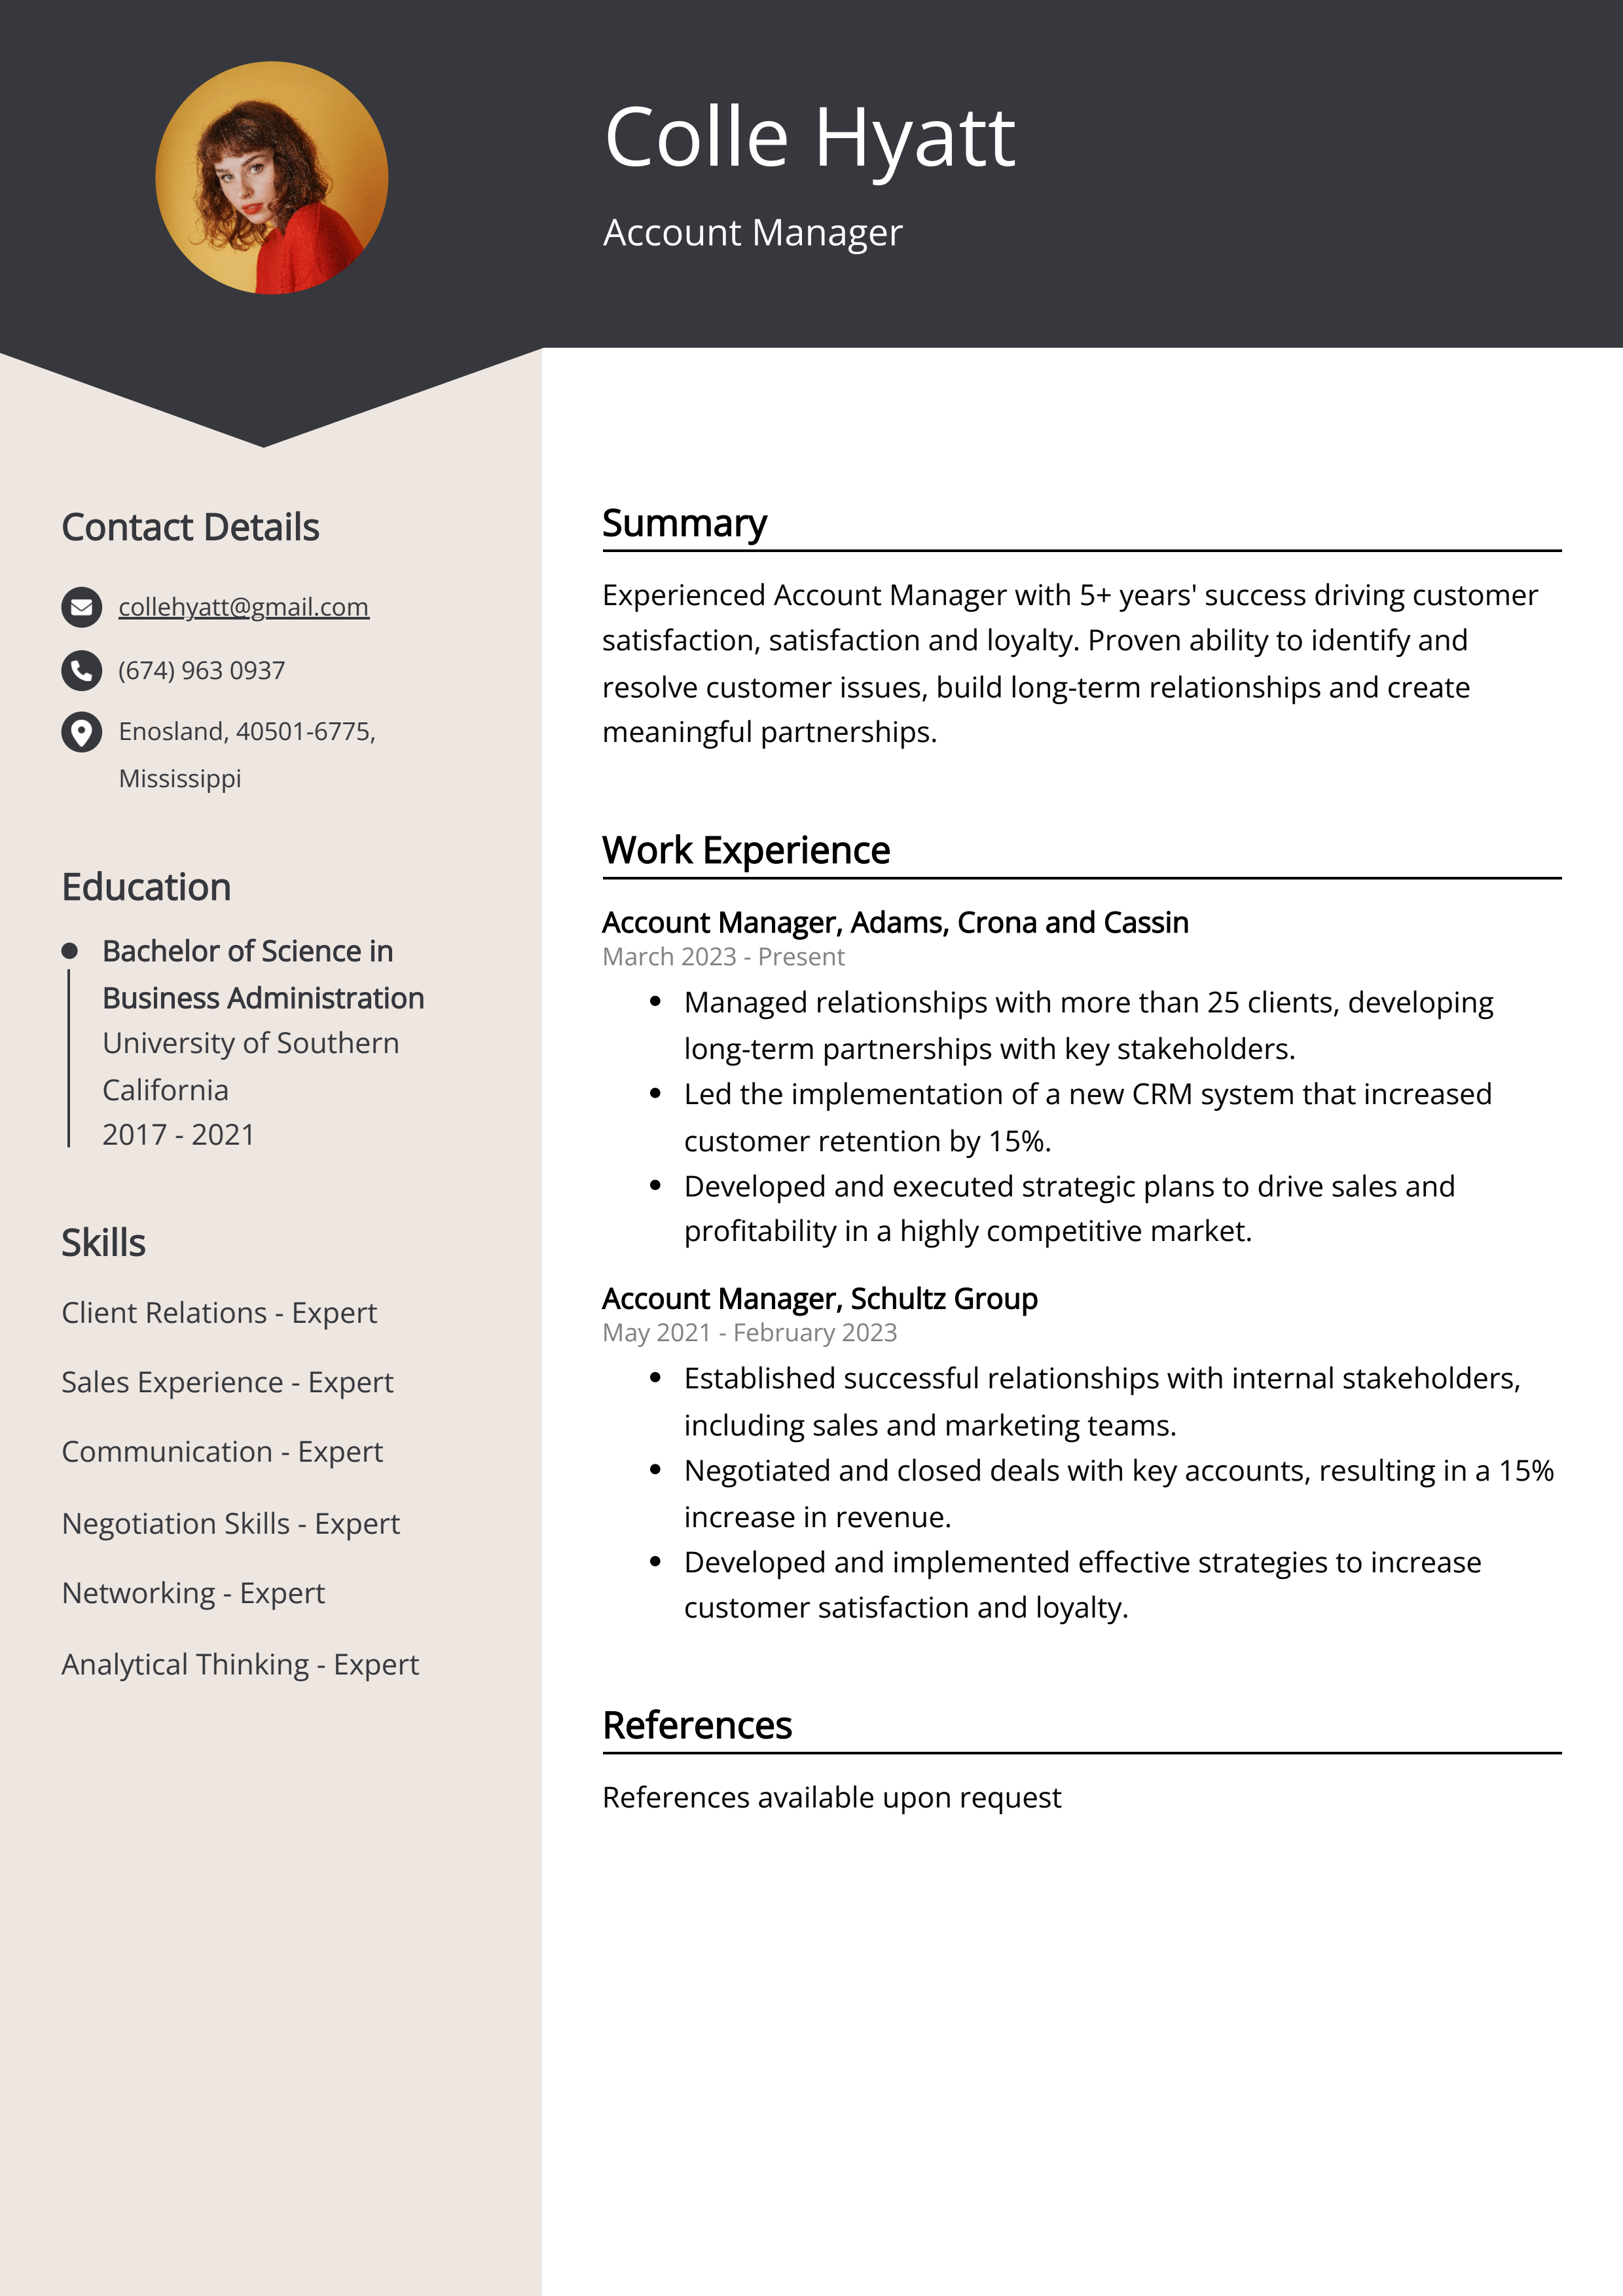 Account Manager CV Example